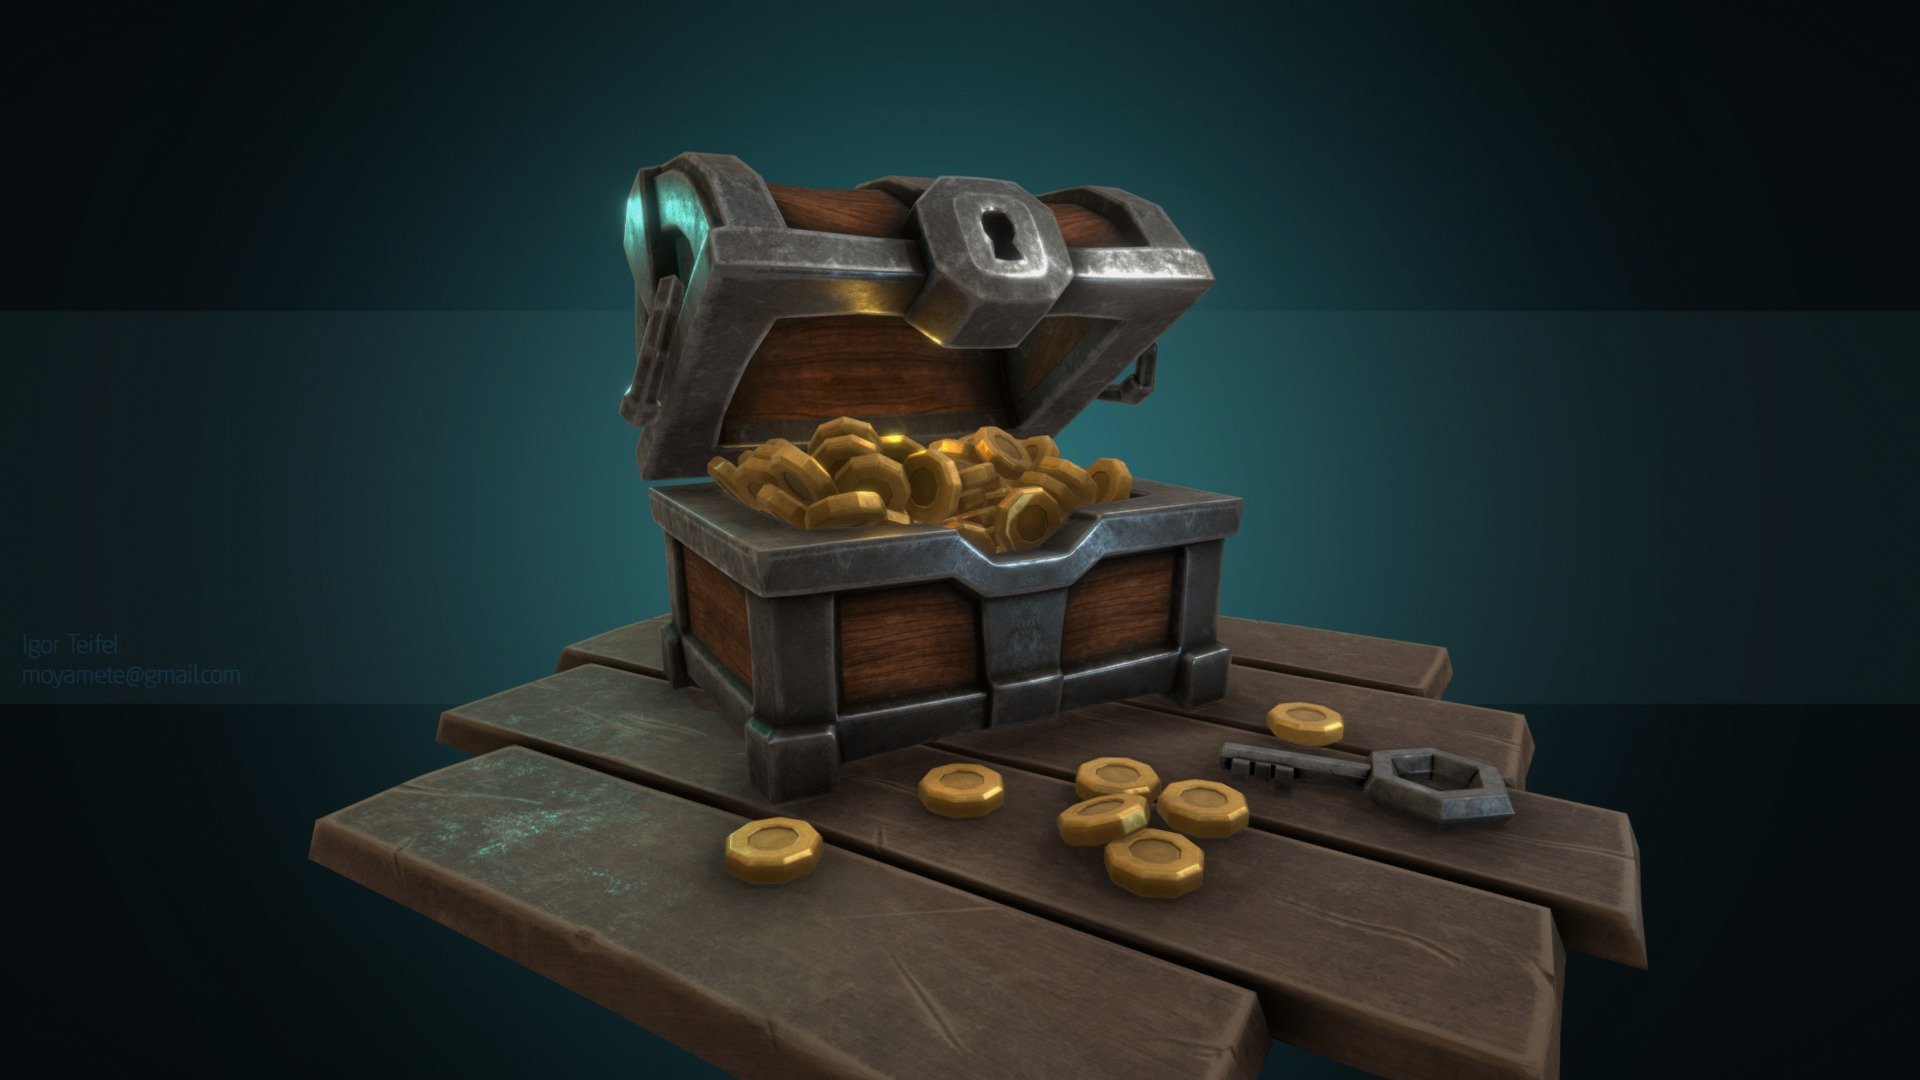 Modeled in Zbrush. Textures done in Substance Painter

CGTrader - http://bit.ly/2sACHnr - Treasure chest - Buy Royalty Free 3D model by teo (@moyamete) 3d model